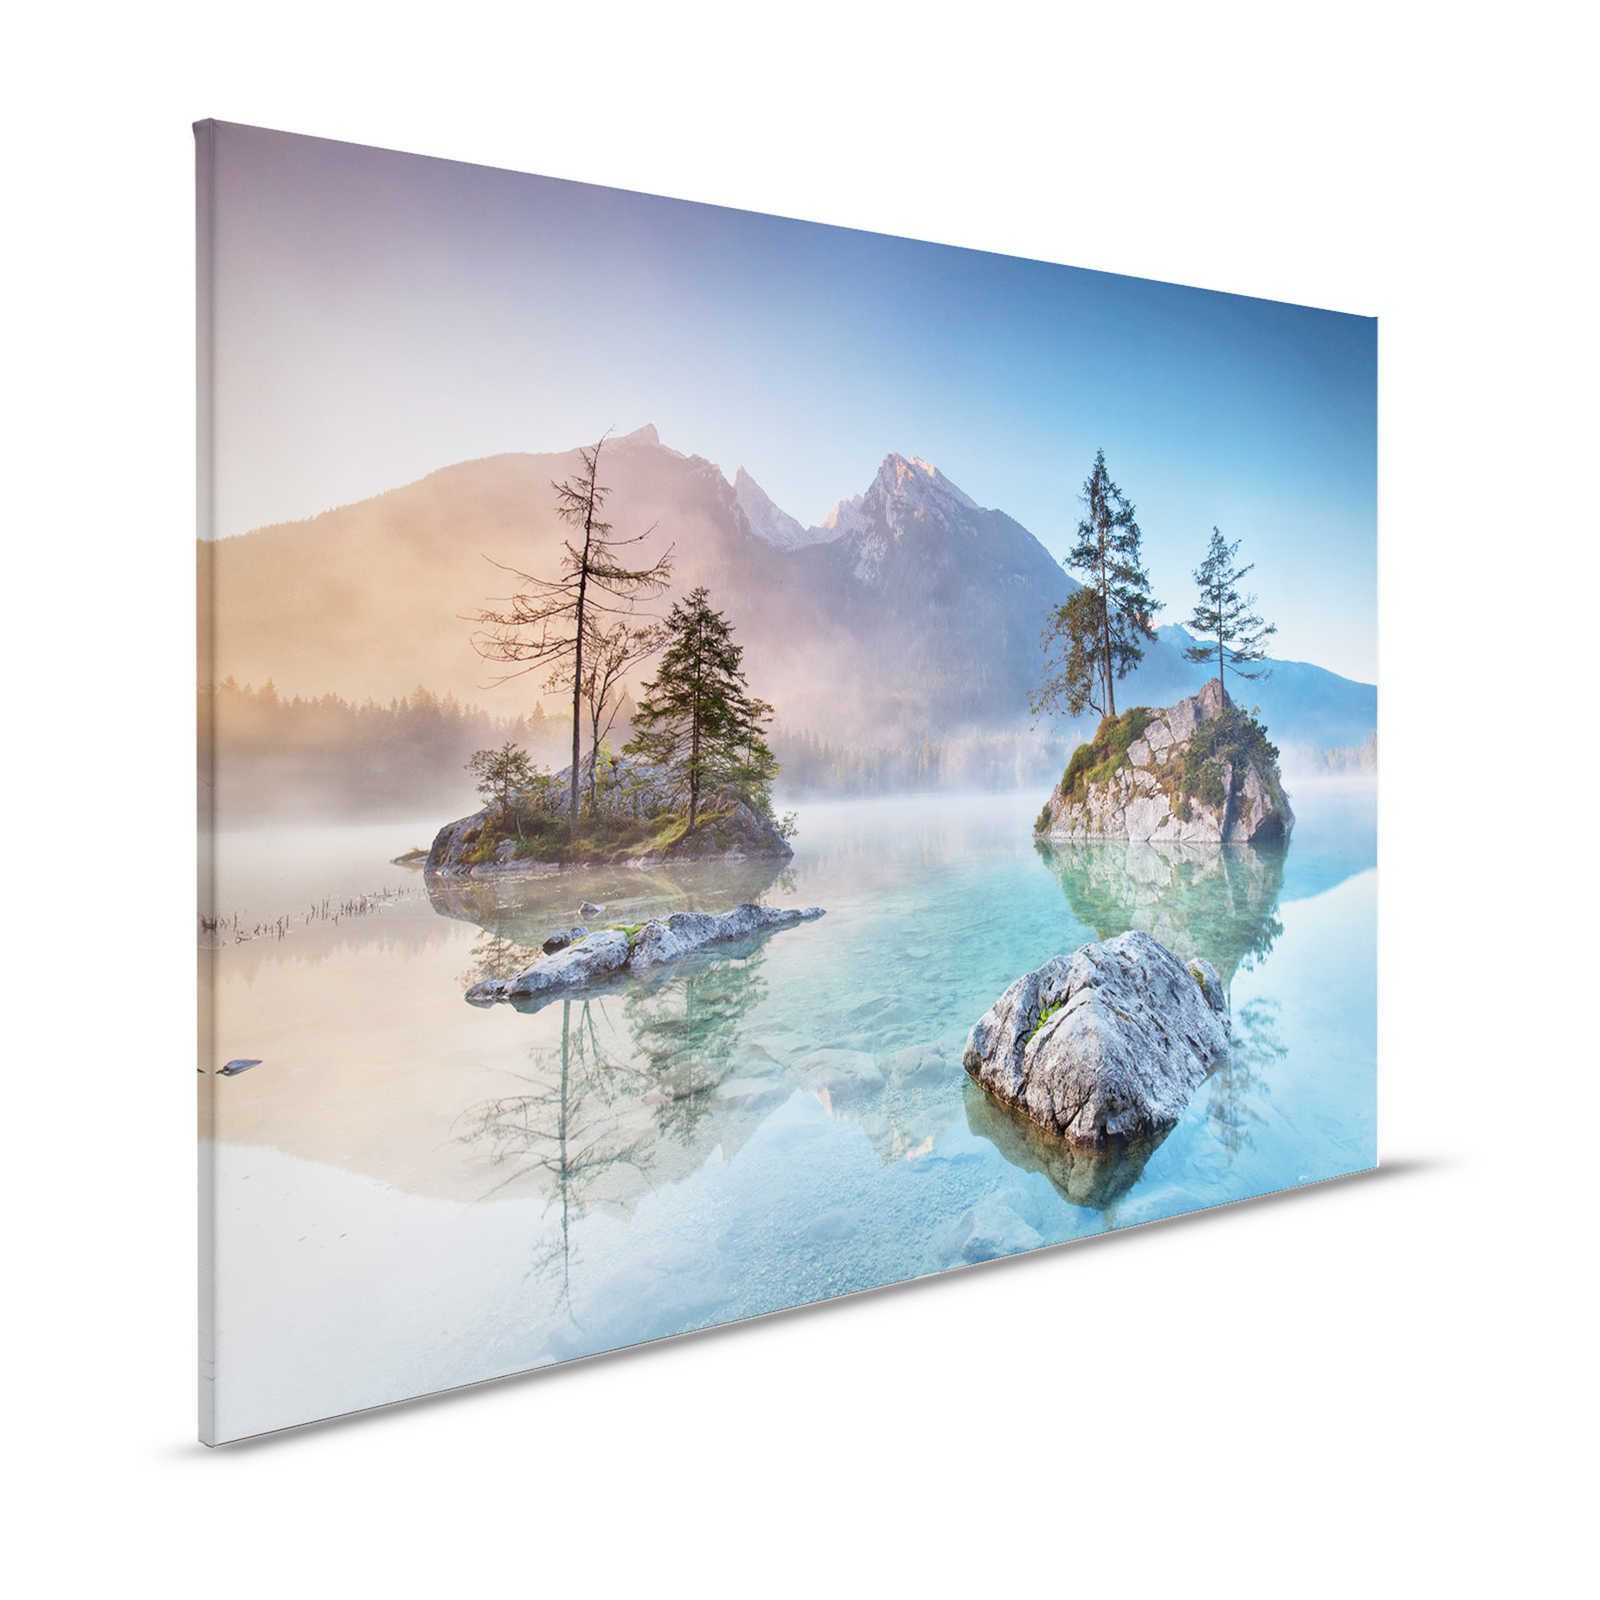 Clear mountain lake canvas painting with natural mountain panorama - 1.20 m x 0.80 m
